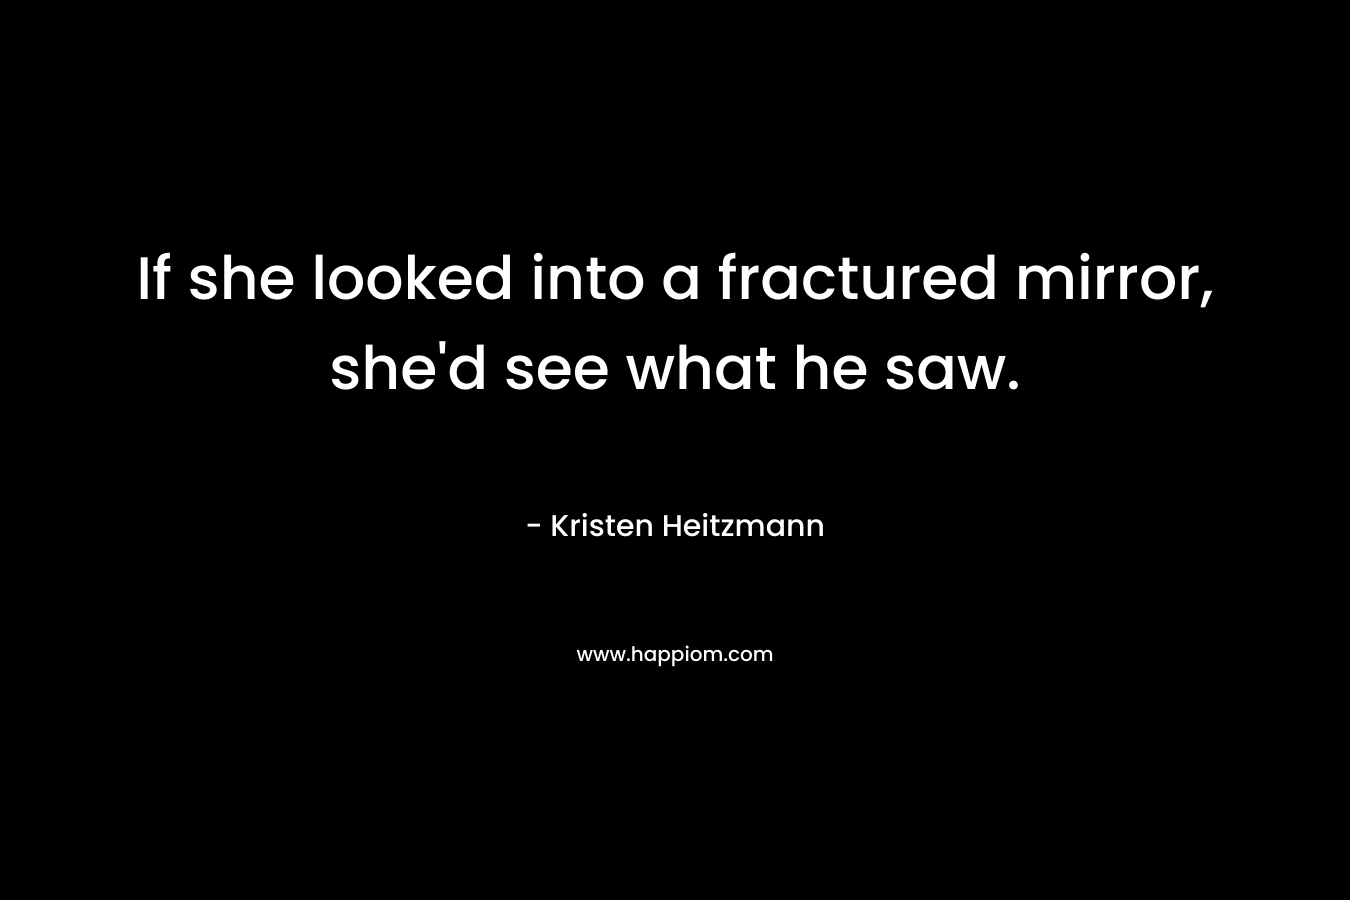 If she looked into a fractured mirror, she’d see what he saw. – Kristen Heitzmann